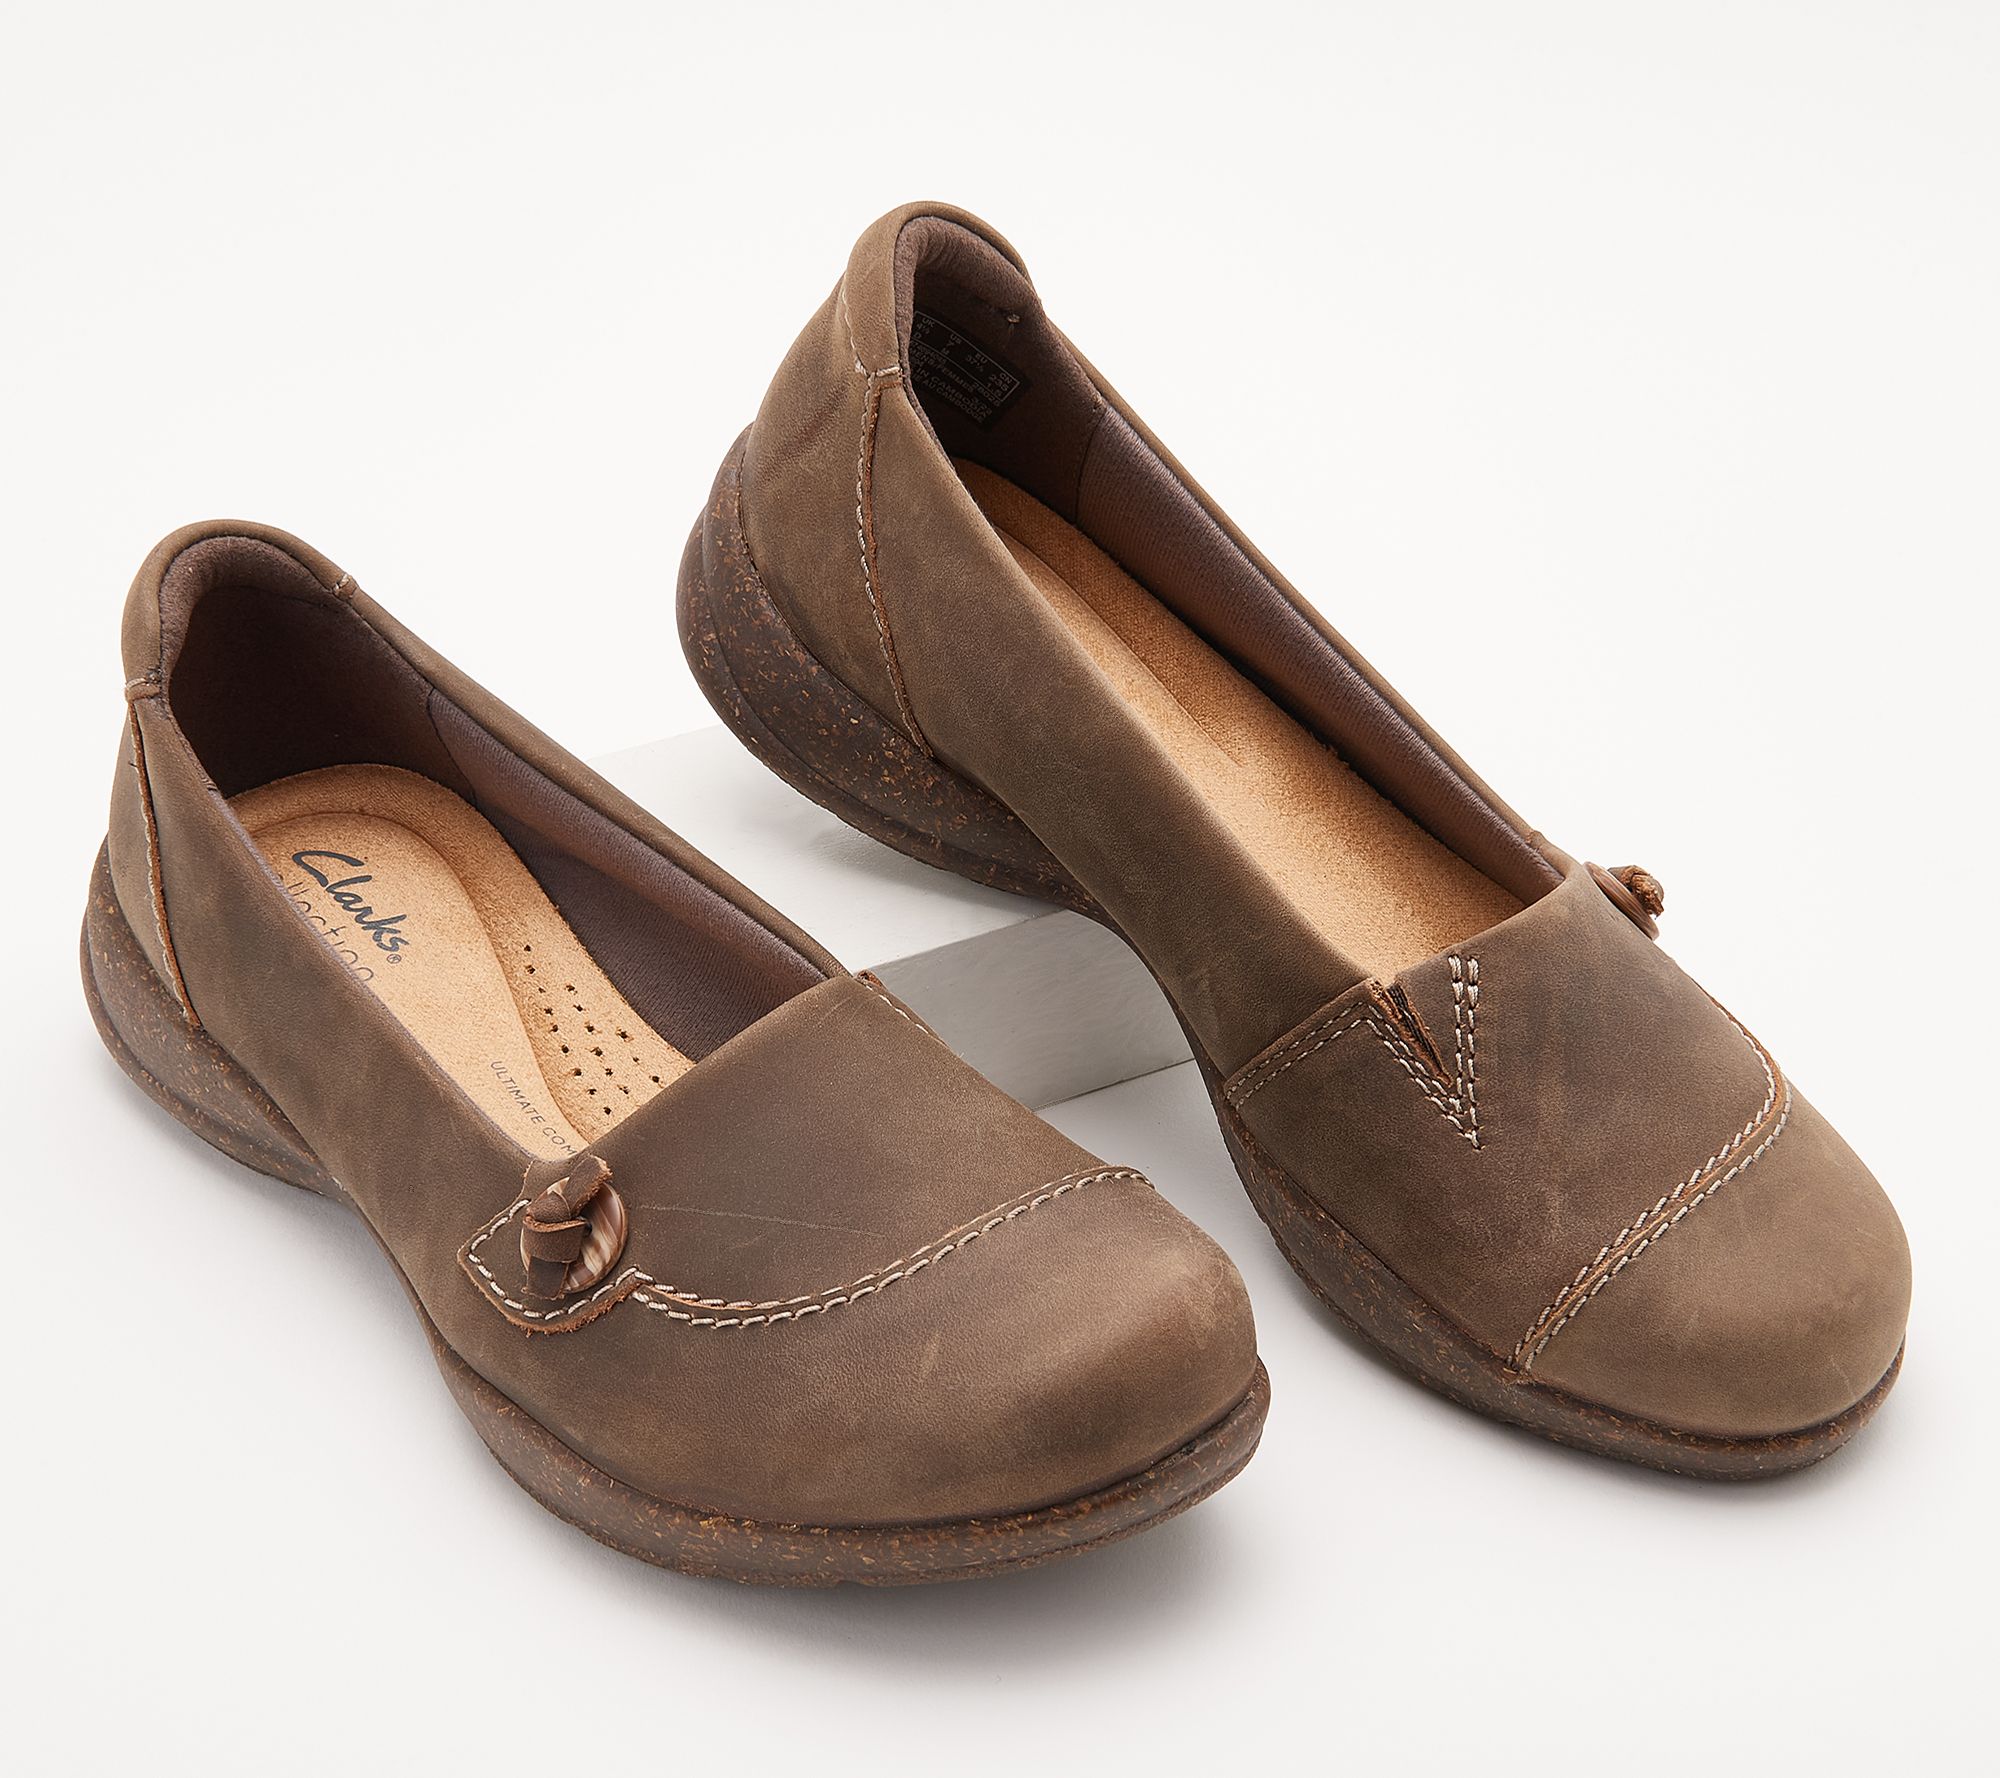 Clarks Collection Leather Slip-Ons Sky - QVC.com